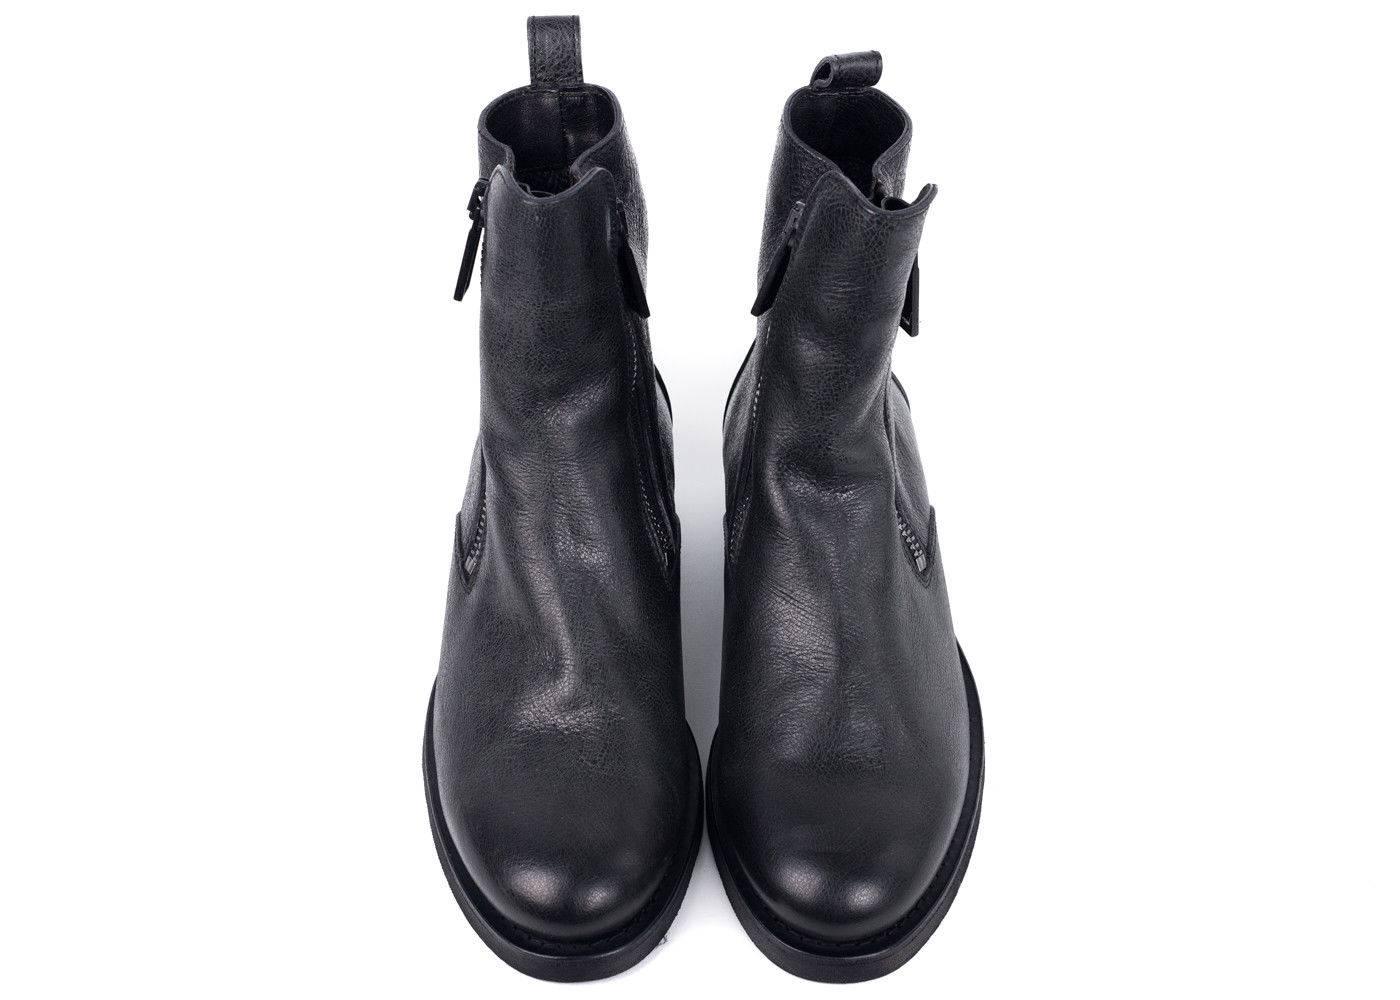 DSquared2 classic chelsea boots in a faded black color tone with a distressed leather style made from aged clafksin leather. The black ankle boots are the perfect pair for all seasons. Simple yet iconic silhouette, pair these with black jeans or